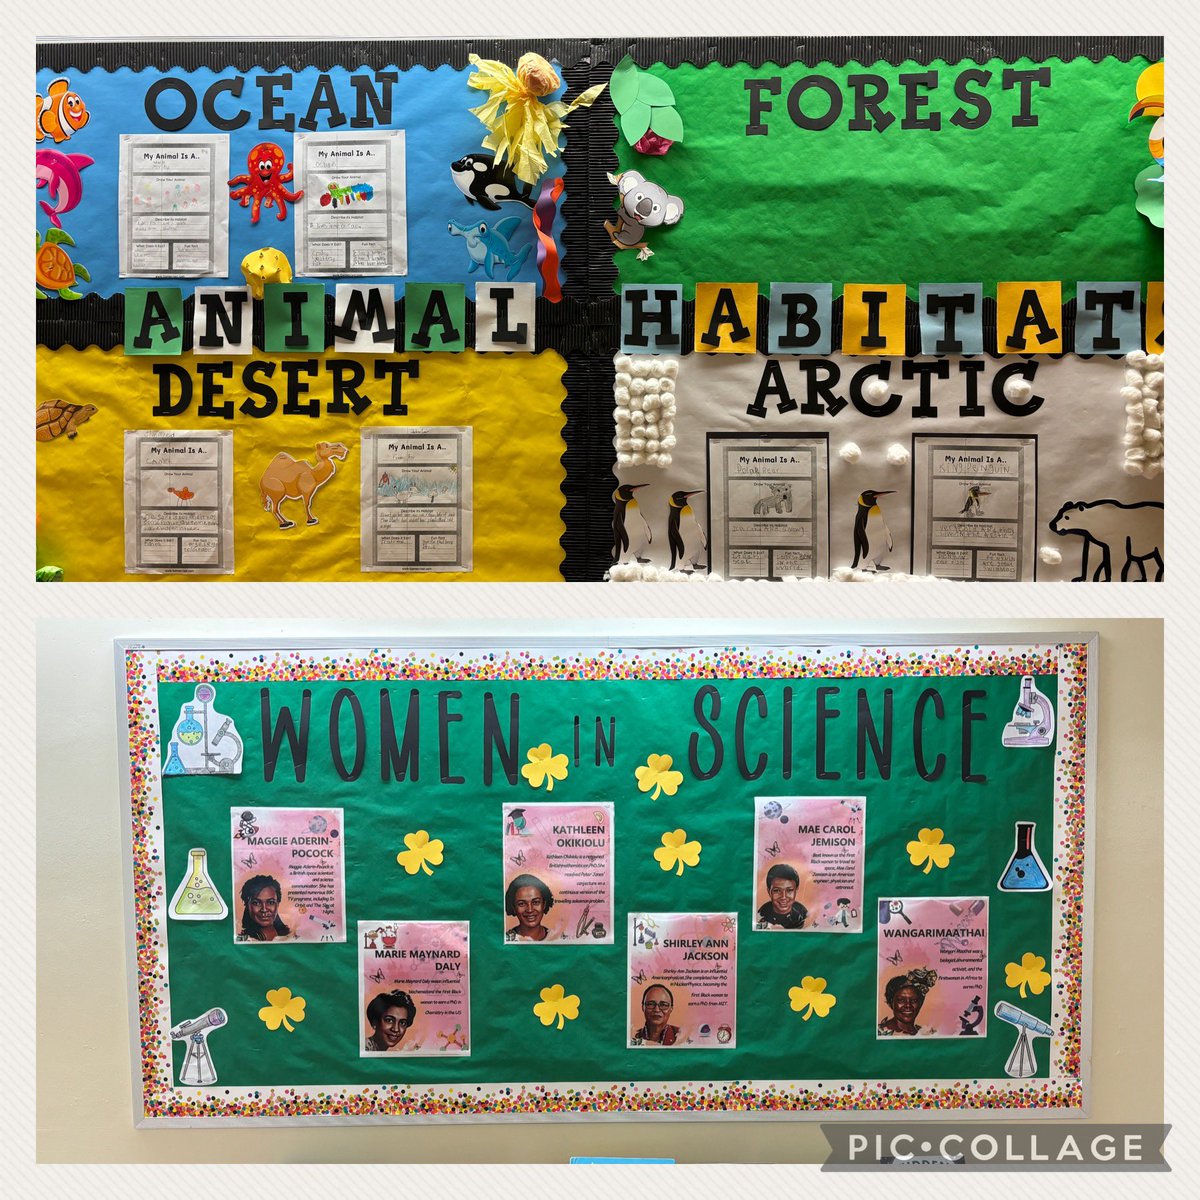 Science March Madness @RPEMuseummagnet this week involved classroom experiments, Vocabulary Dress Day, Hallway Trivia, and every class had a science themed bulletin board. Who says Science isn’t fun? @RPE_AP @bcpsstem @BcpsCentral_ @teach_n_sneaks